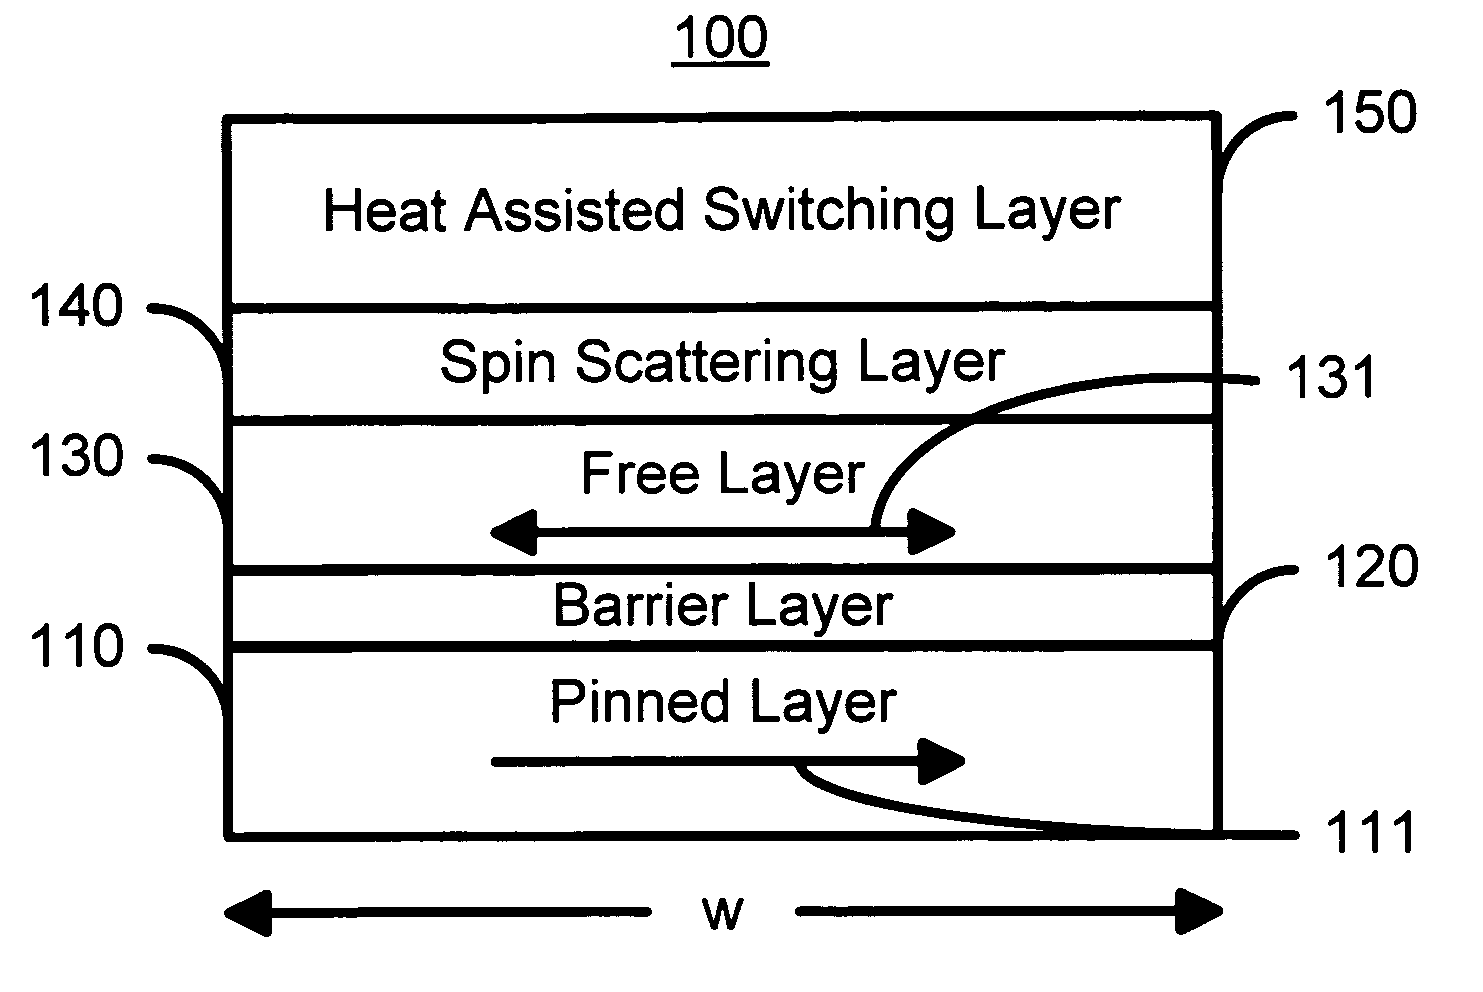 Spin scattering and heat assisted switching of a magnetic element